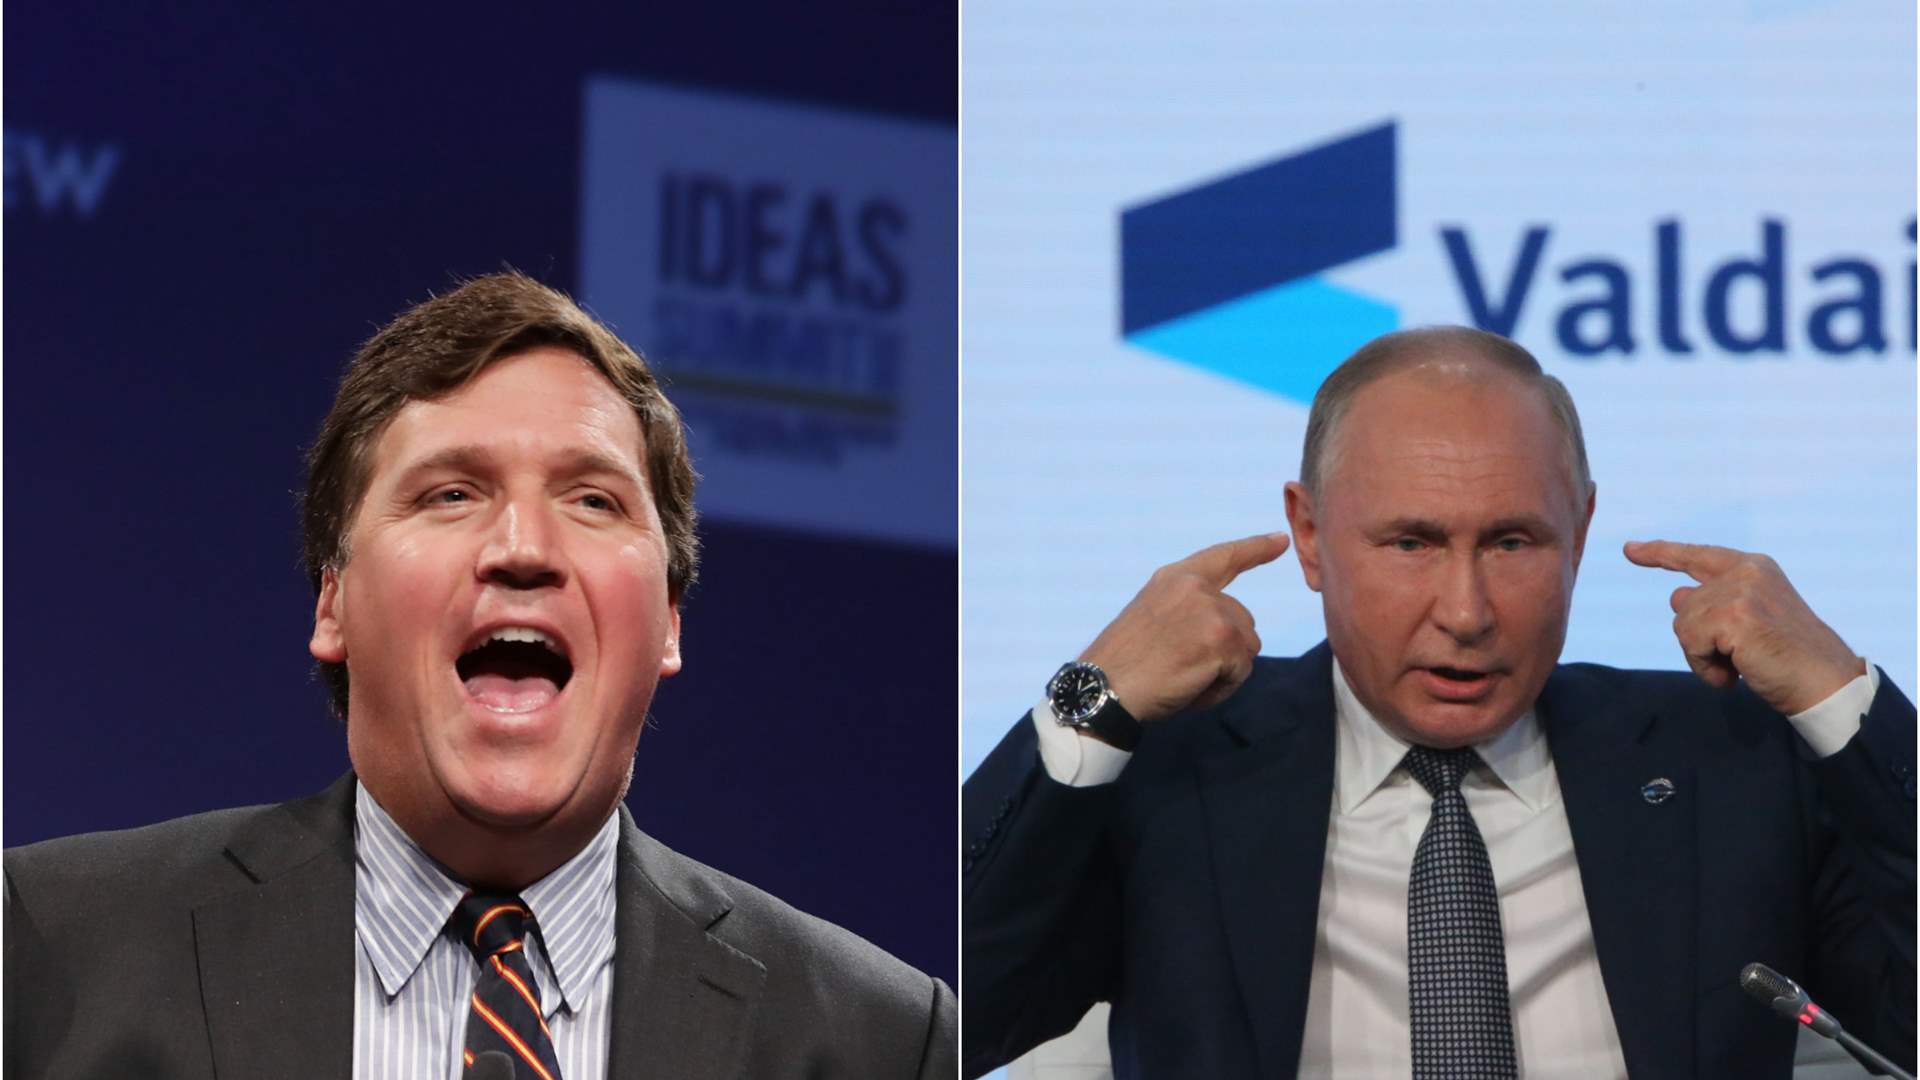 Tucker Carlson&#39;s interview with Vladimir Putin to be aired on Thursday evening 